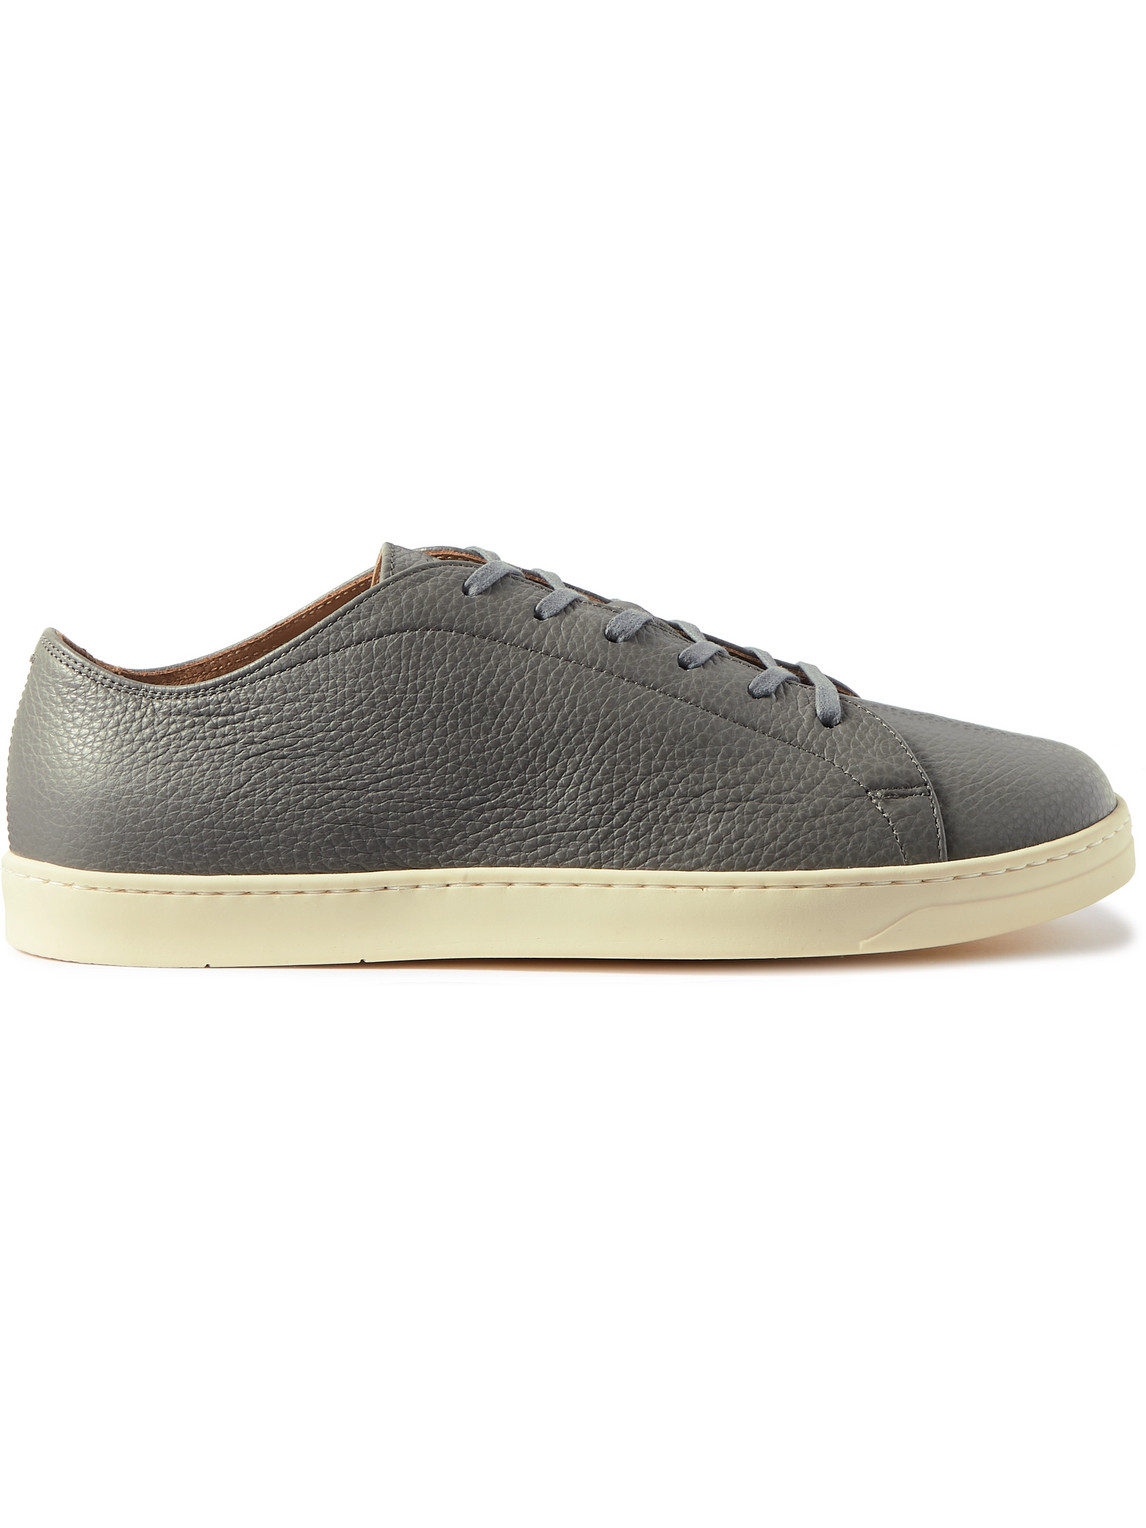 George Cleverley Full-grain Leather Sneakers In Gray